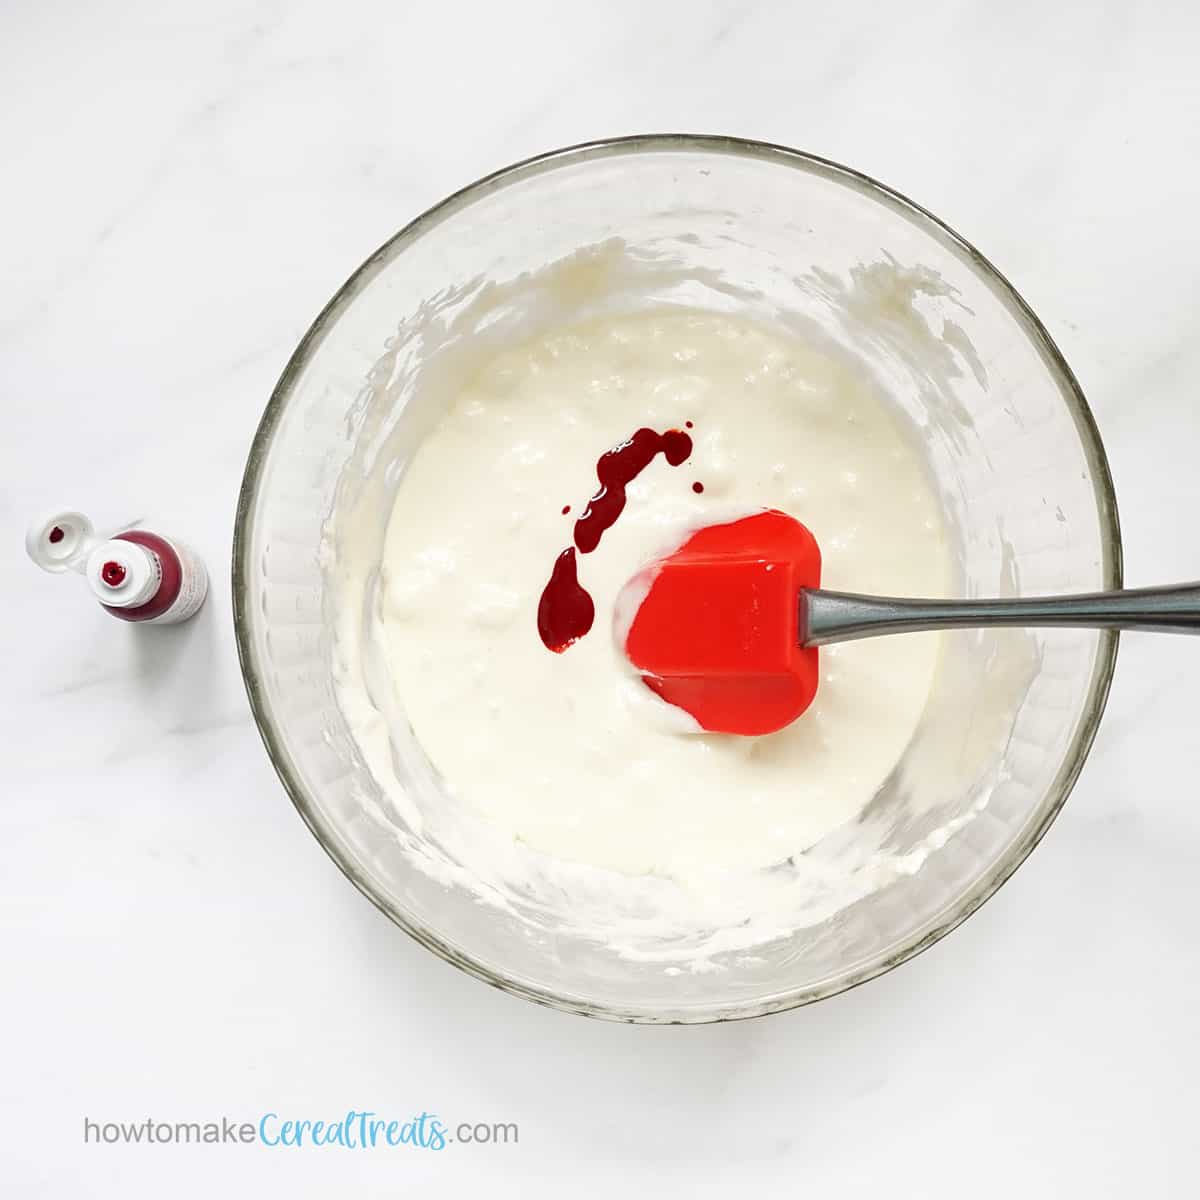 red food coloring in marshmallow mixture to make cereal treats